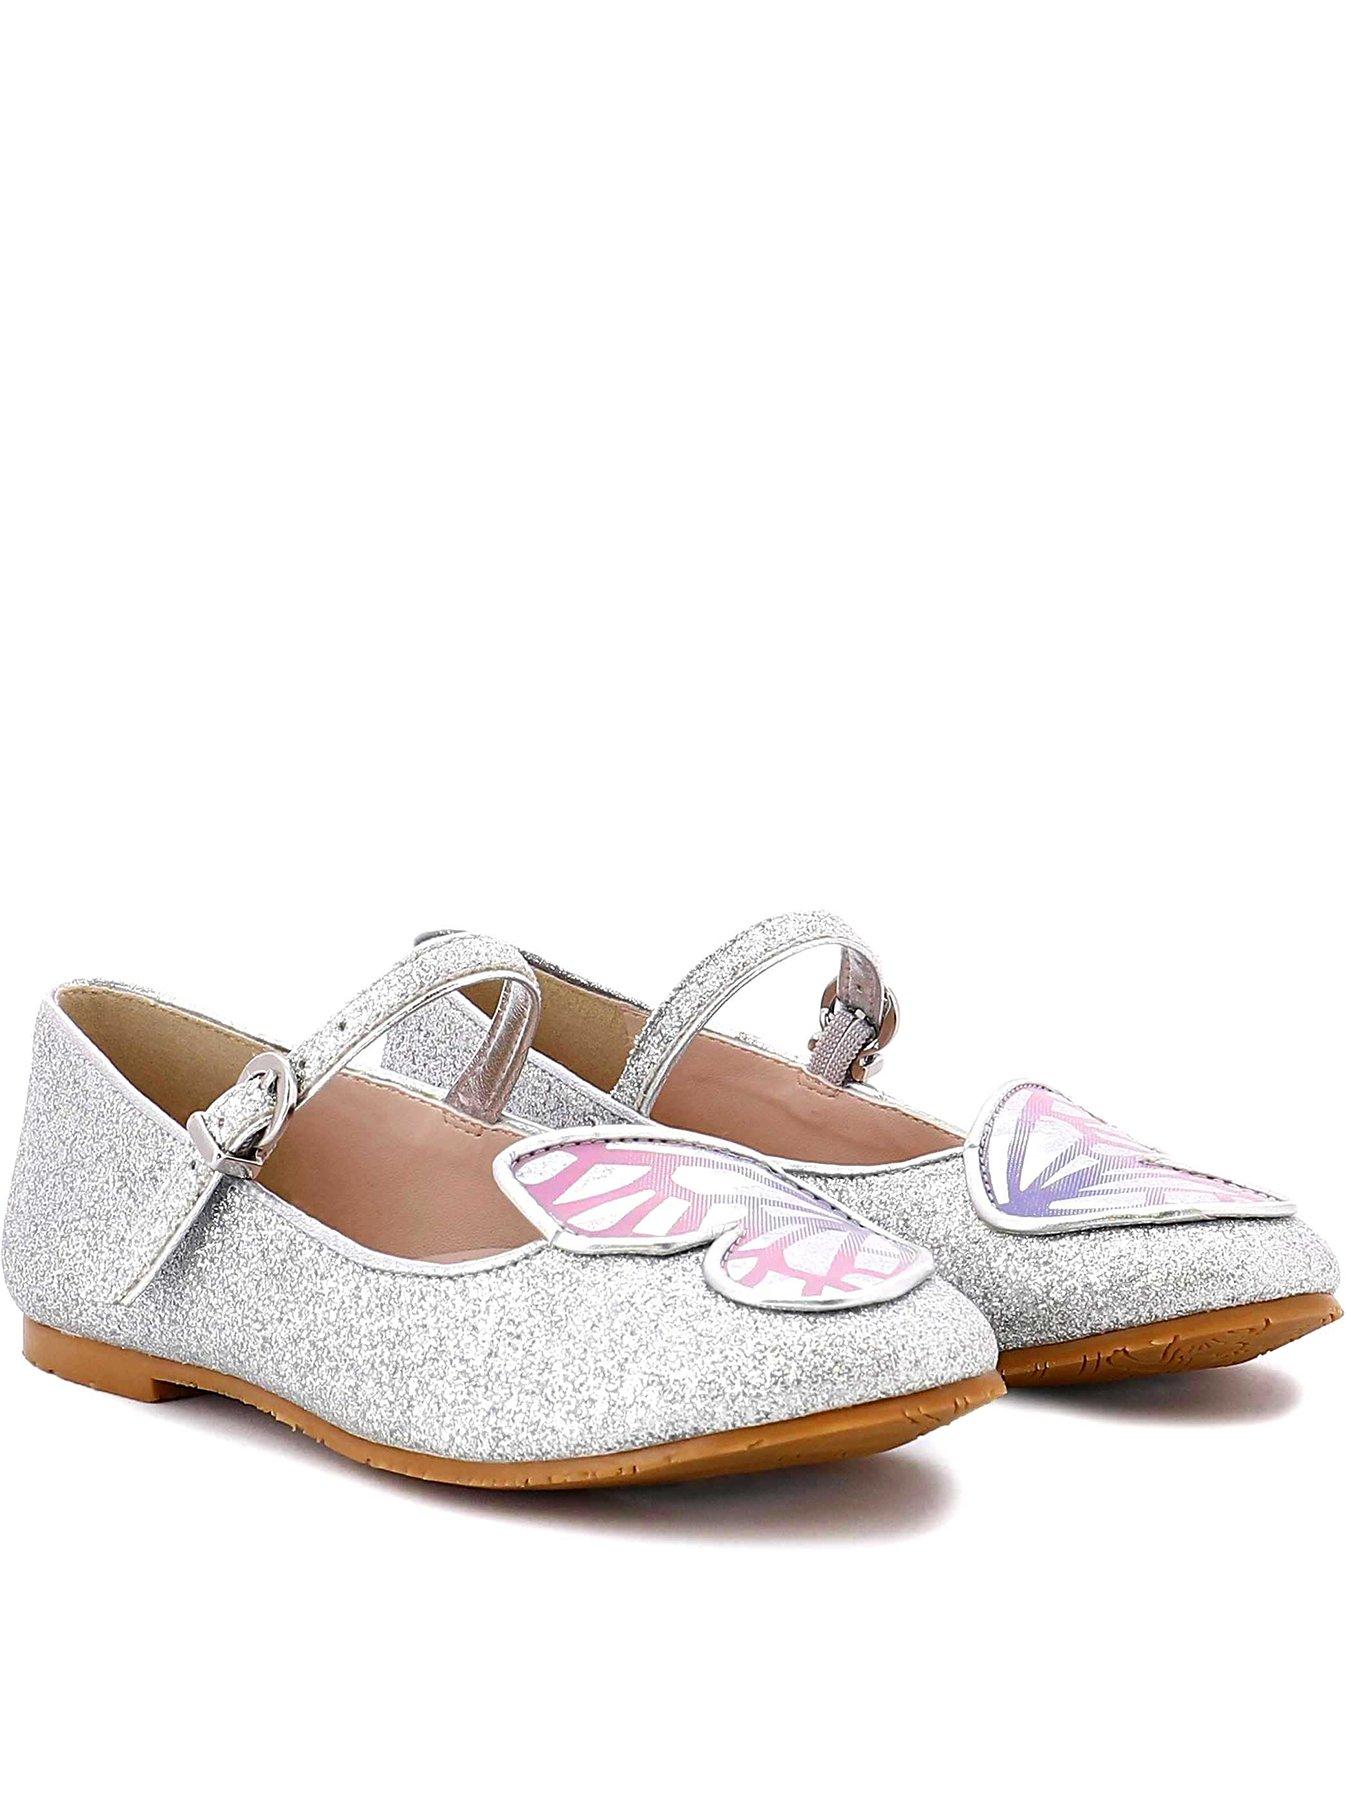  Junior Butterfly Flat Shoes - Silver/Pastel